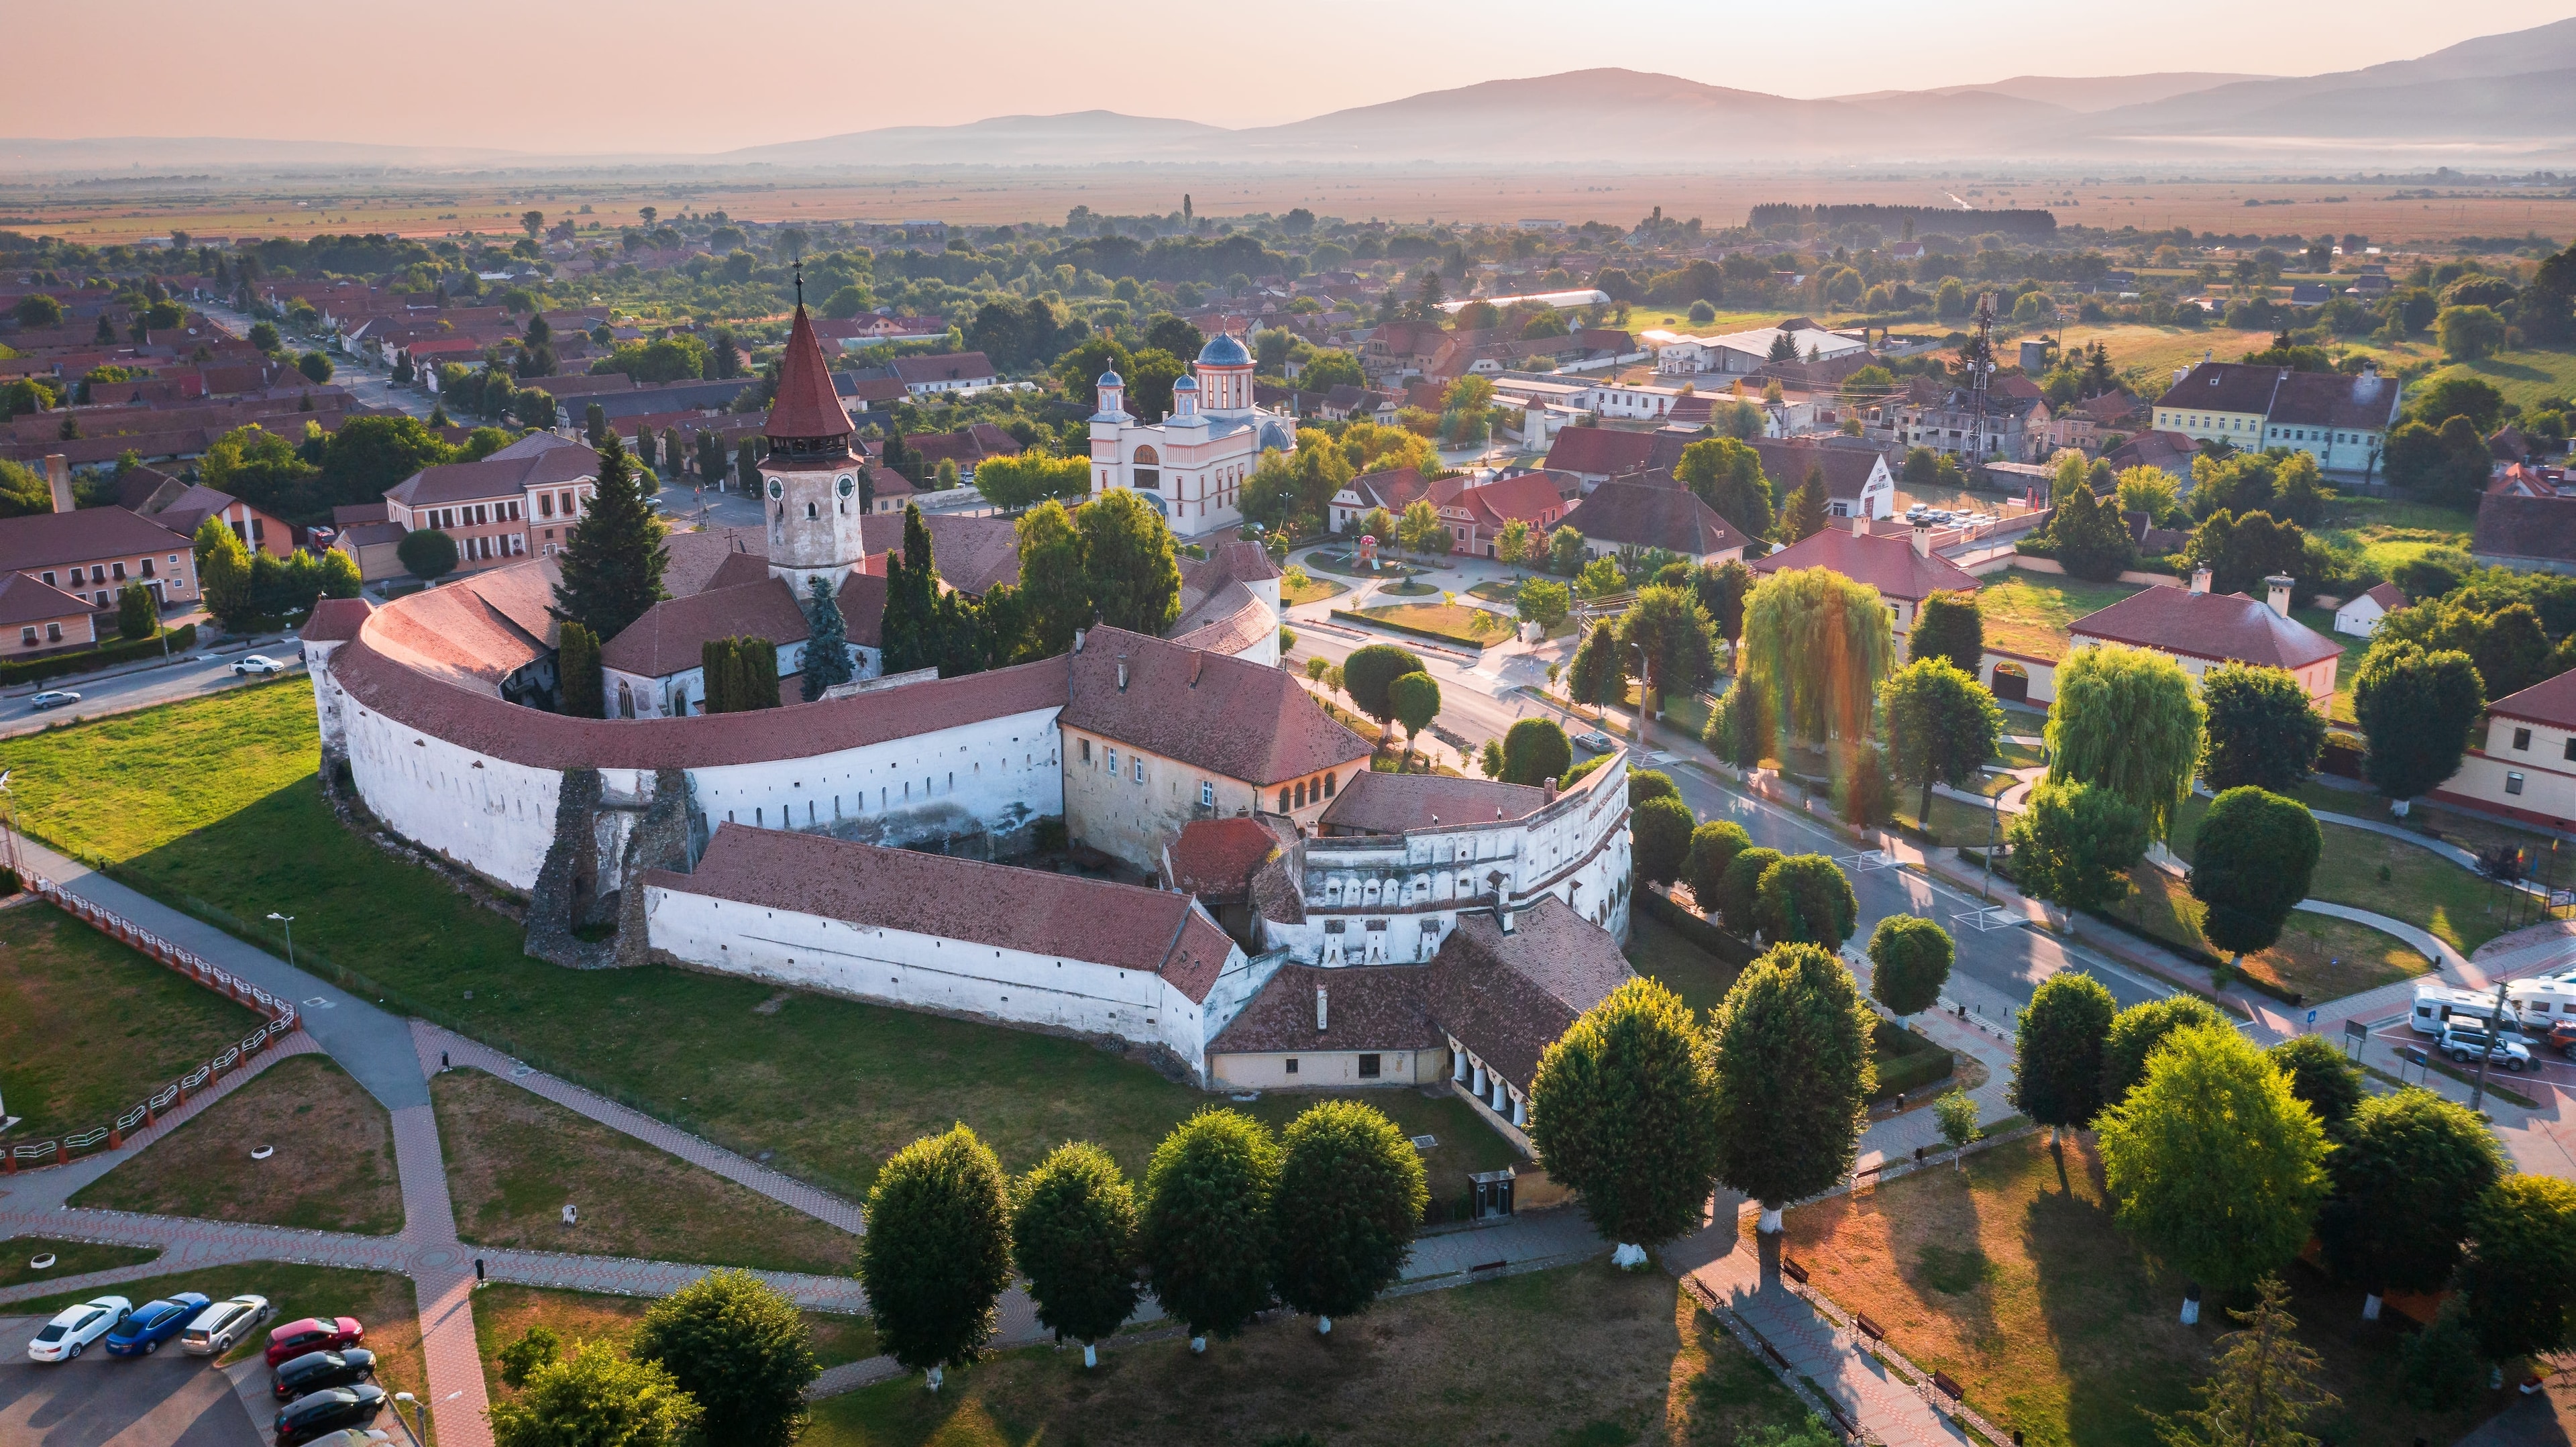 A Complete Guide on Where to Stay in Transylvania for Your Upcoming Trip